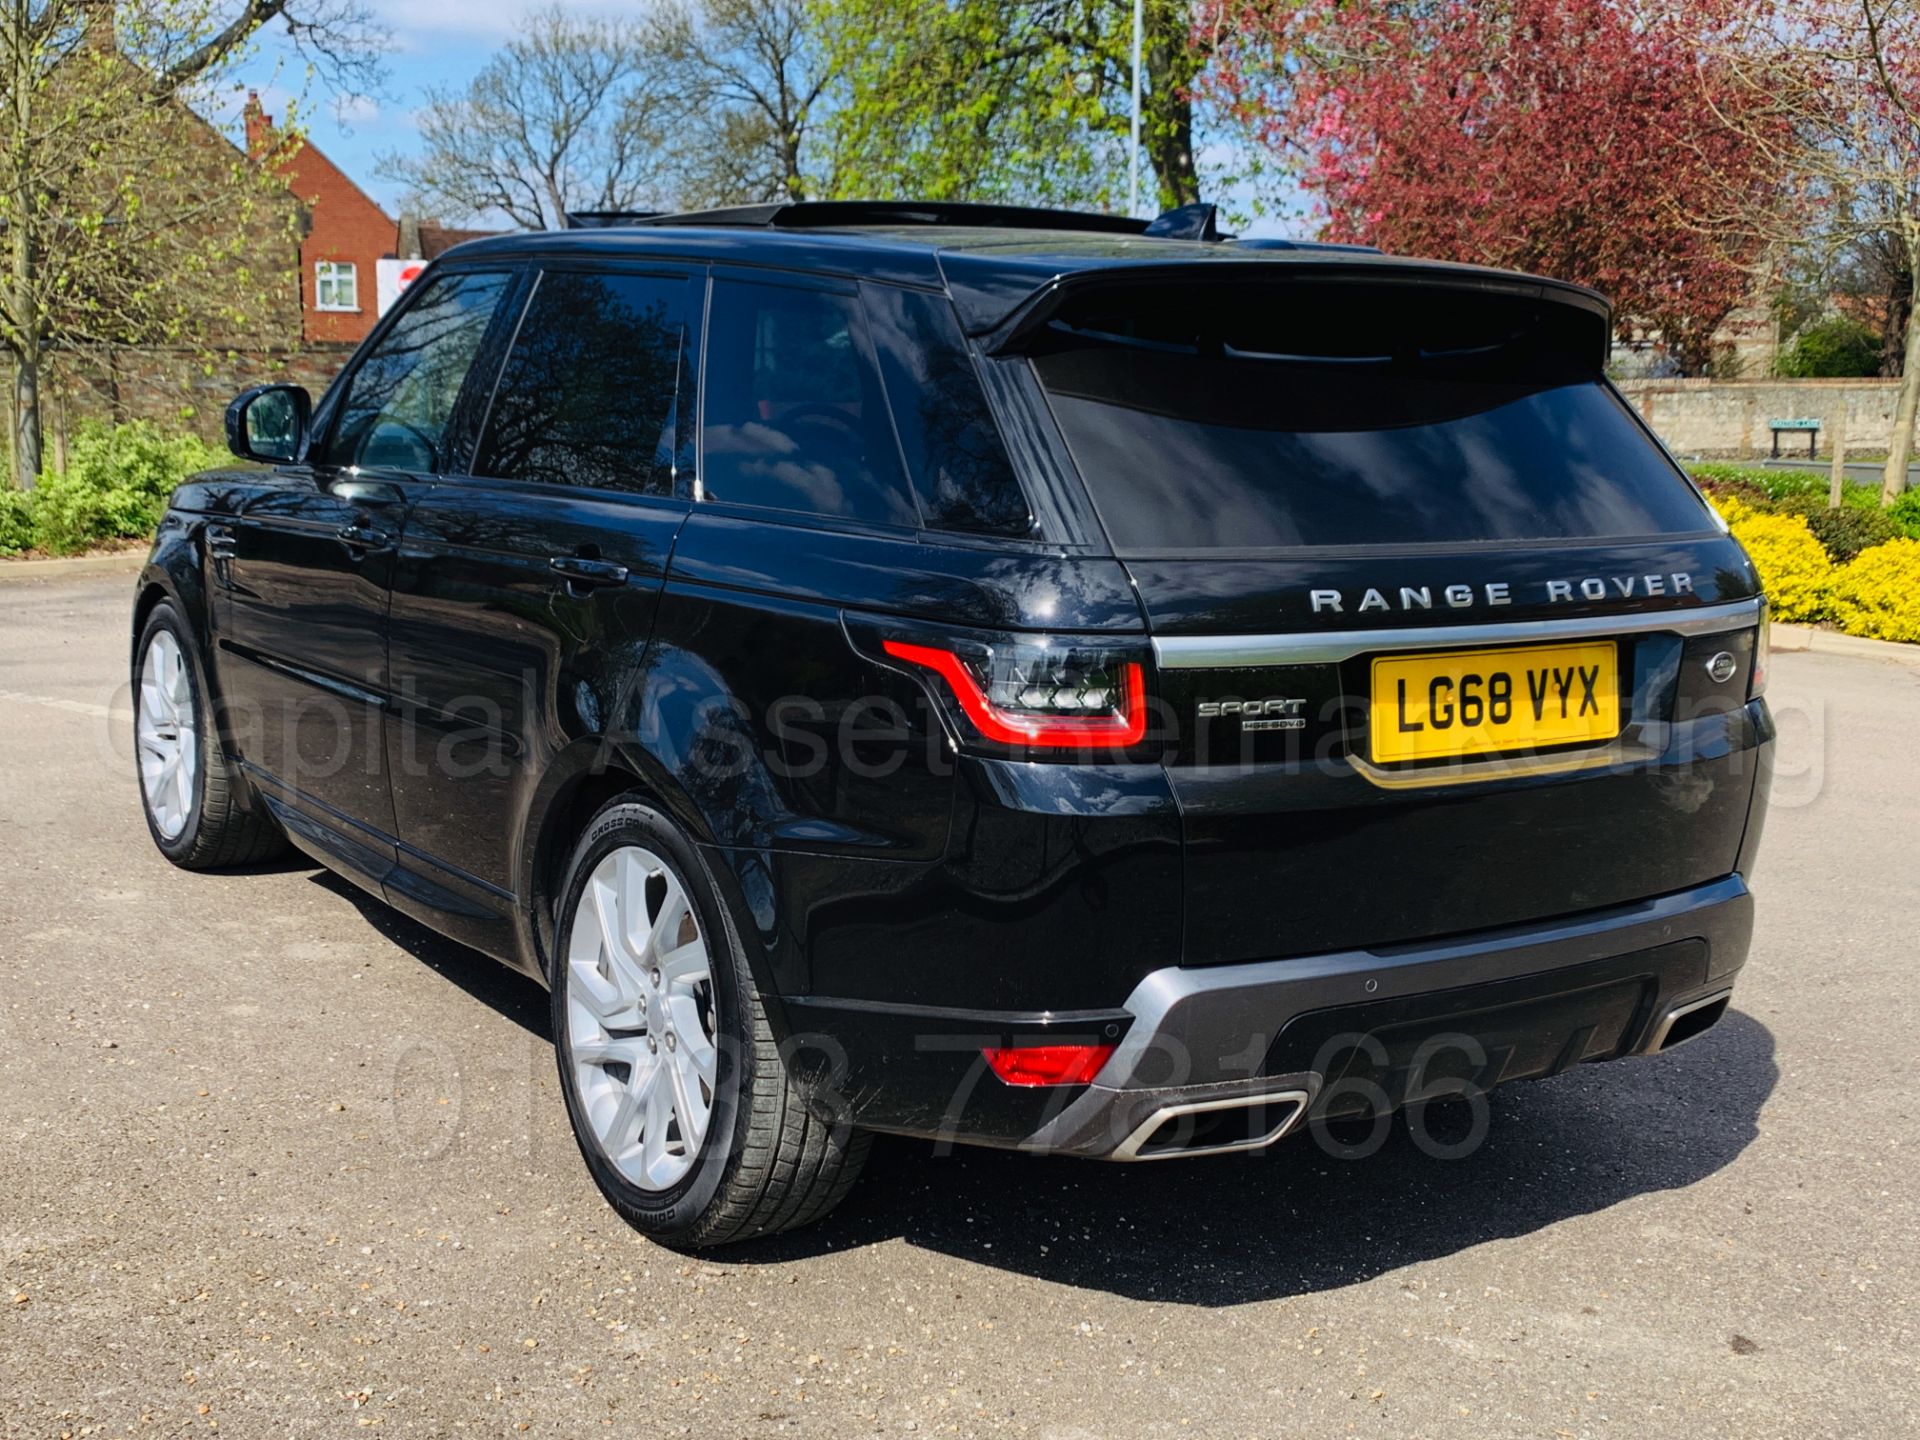 (ON SALE) RANGE ROVER SPORT *HSE* (2019 - ALL NEW MODEL) '3.0 SDV6 - 306 BHP - 8 SPEED AUTO' - Image 8 of 73